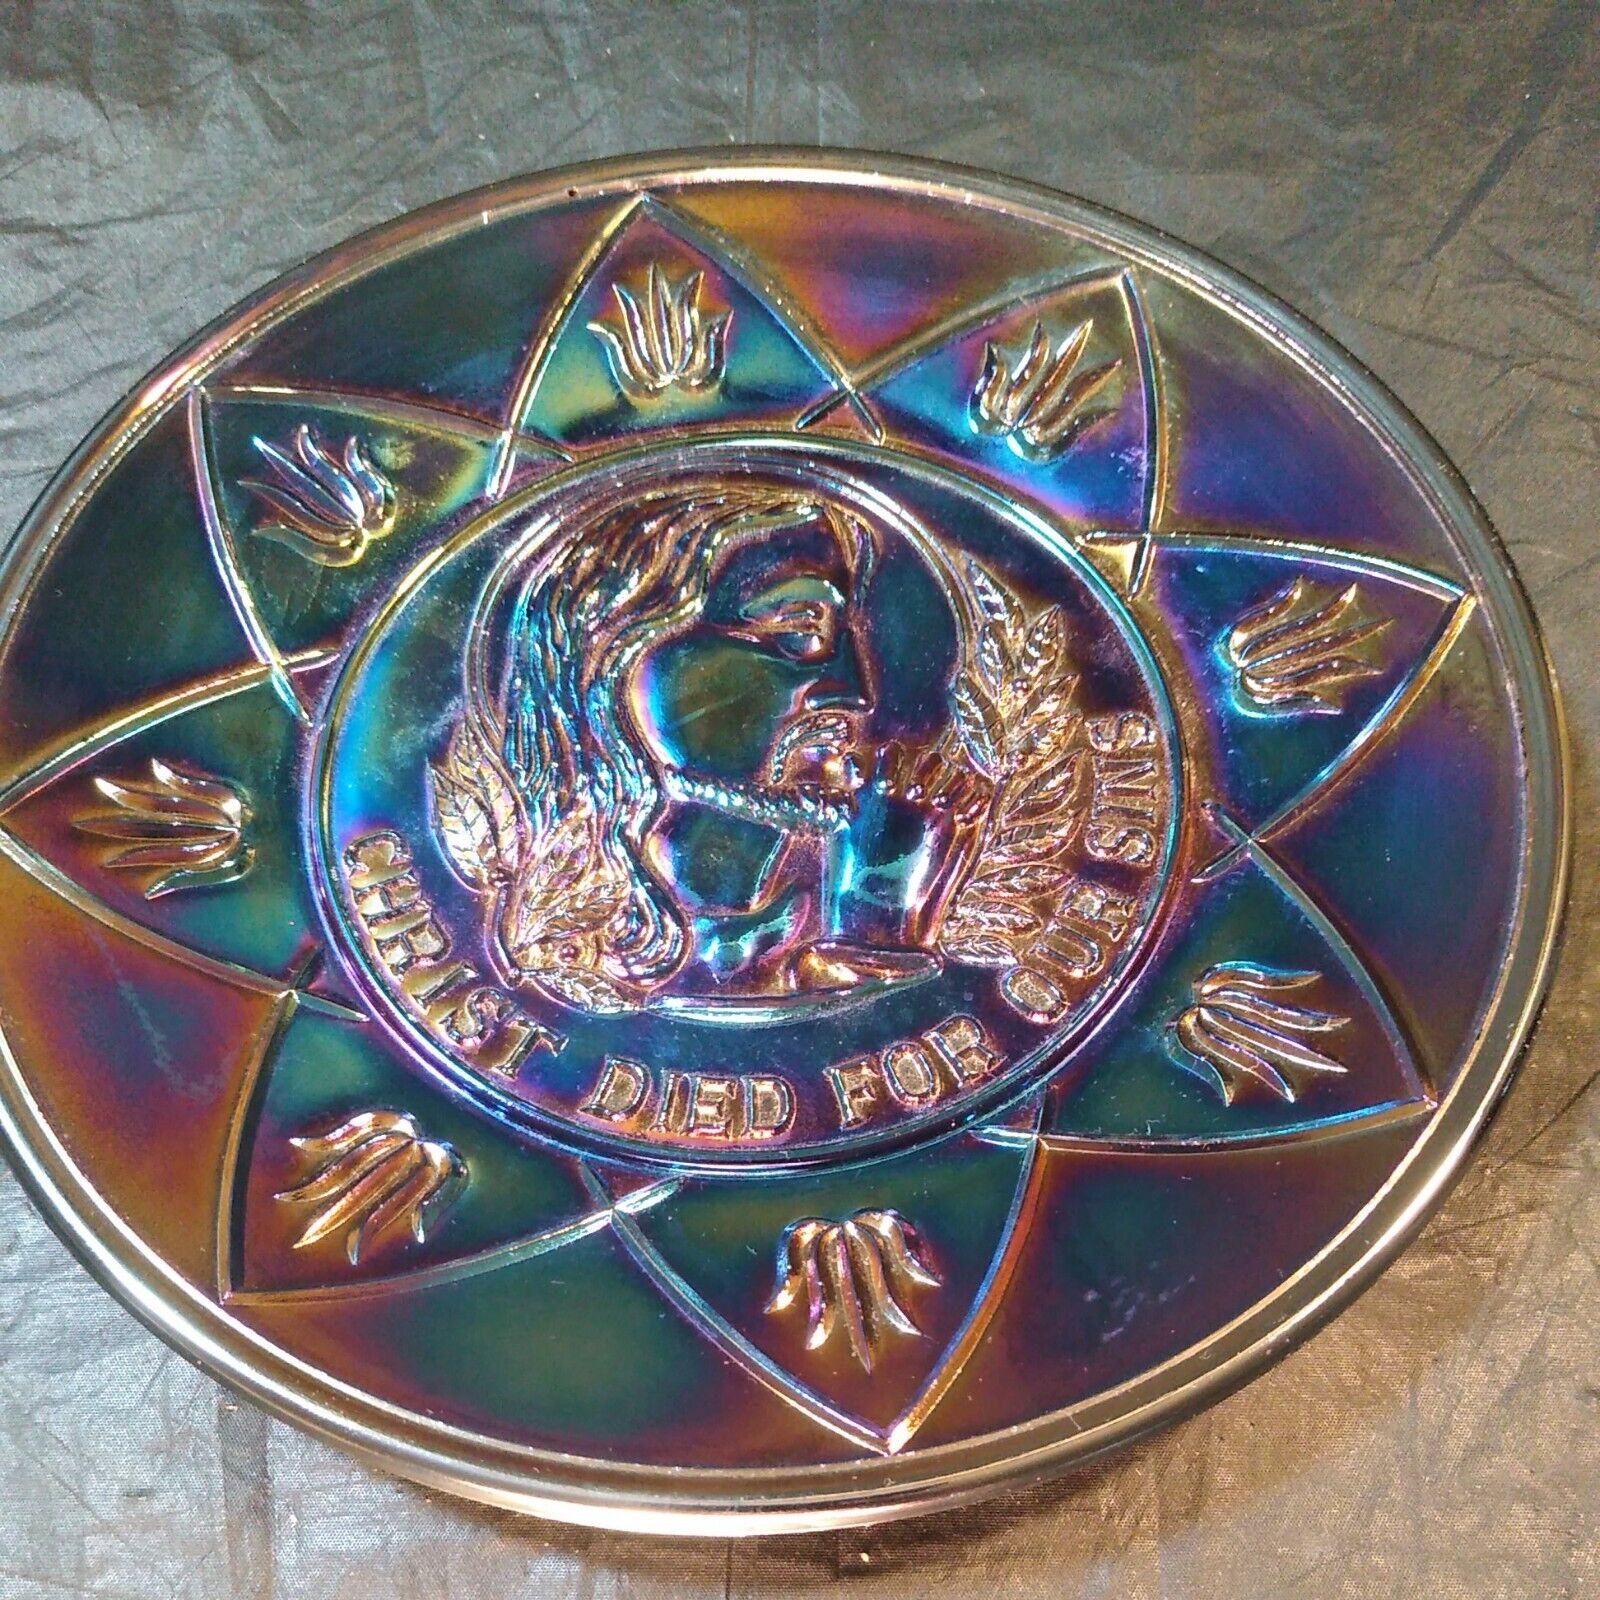 Millville Art Glass 1975 Carnival Glass Plate Christ Died For Our Sins